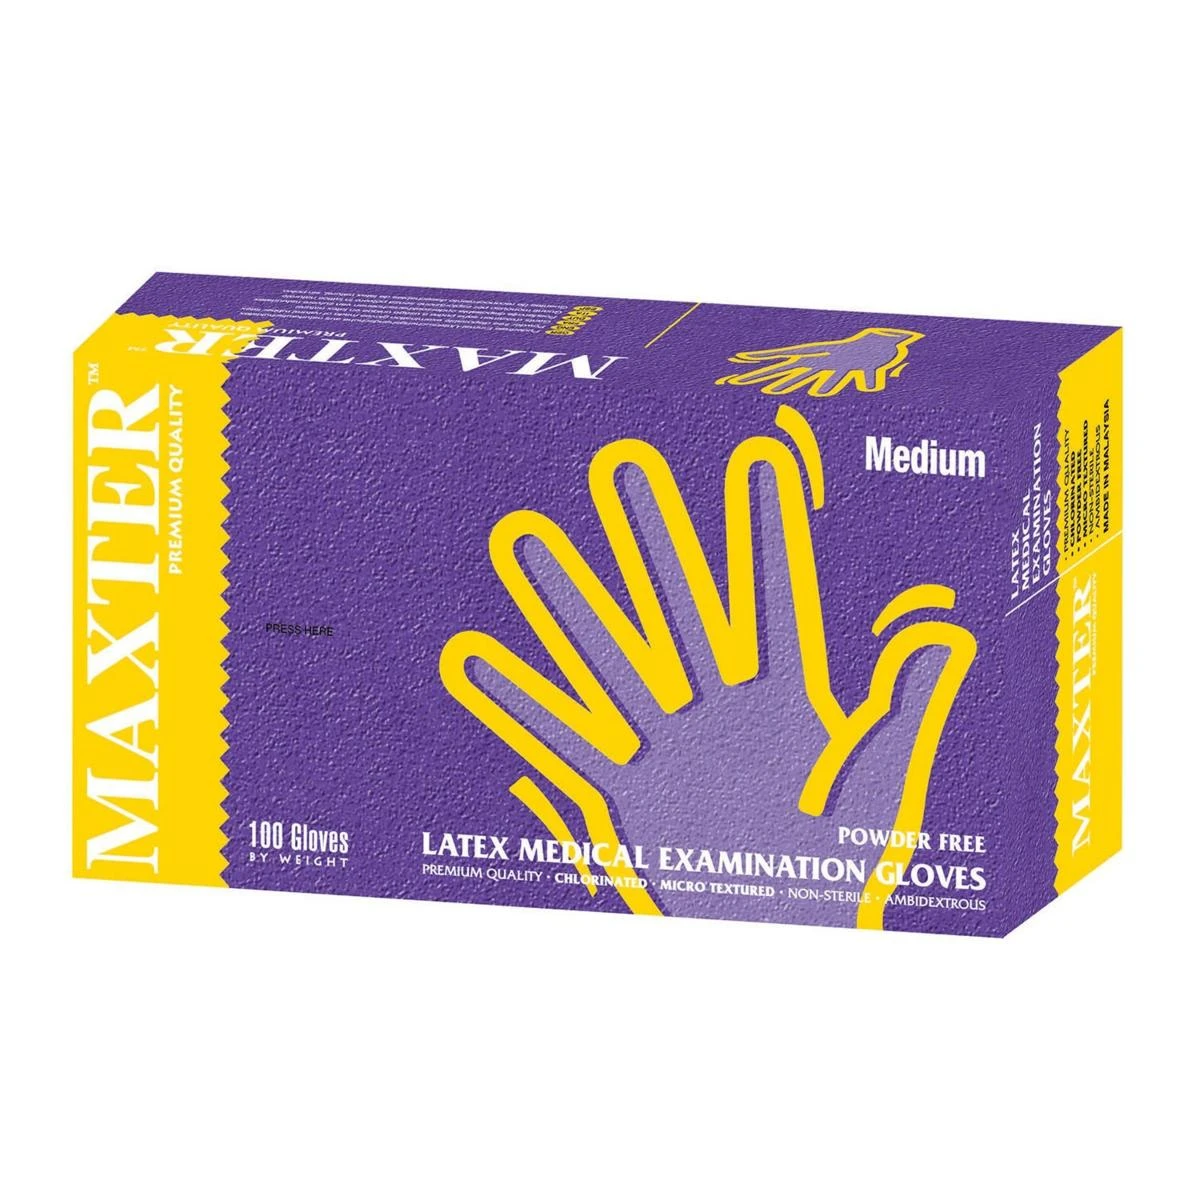 POWDER FREE LATEX GLOVES PACK OF 100 PIECES AVAILABLE IN VAR IOUS SIZES